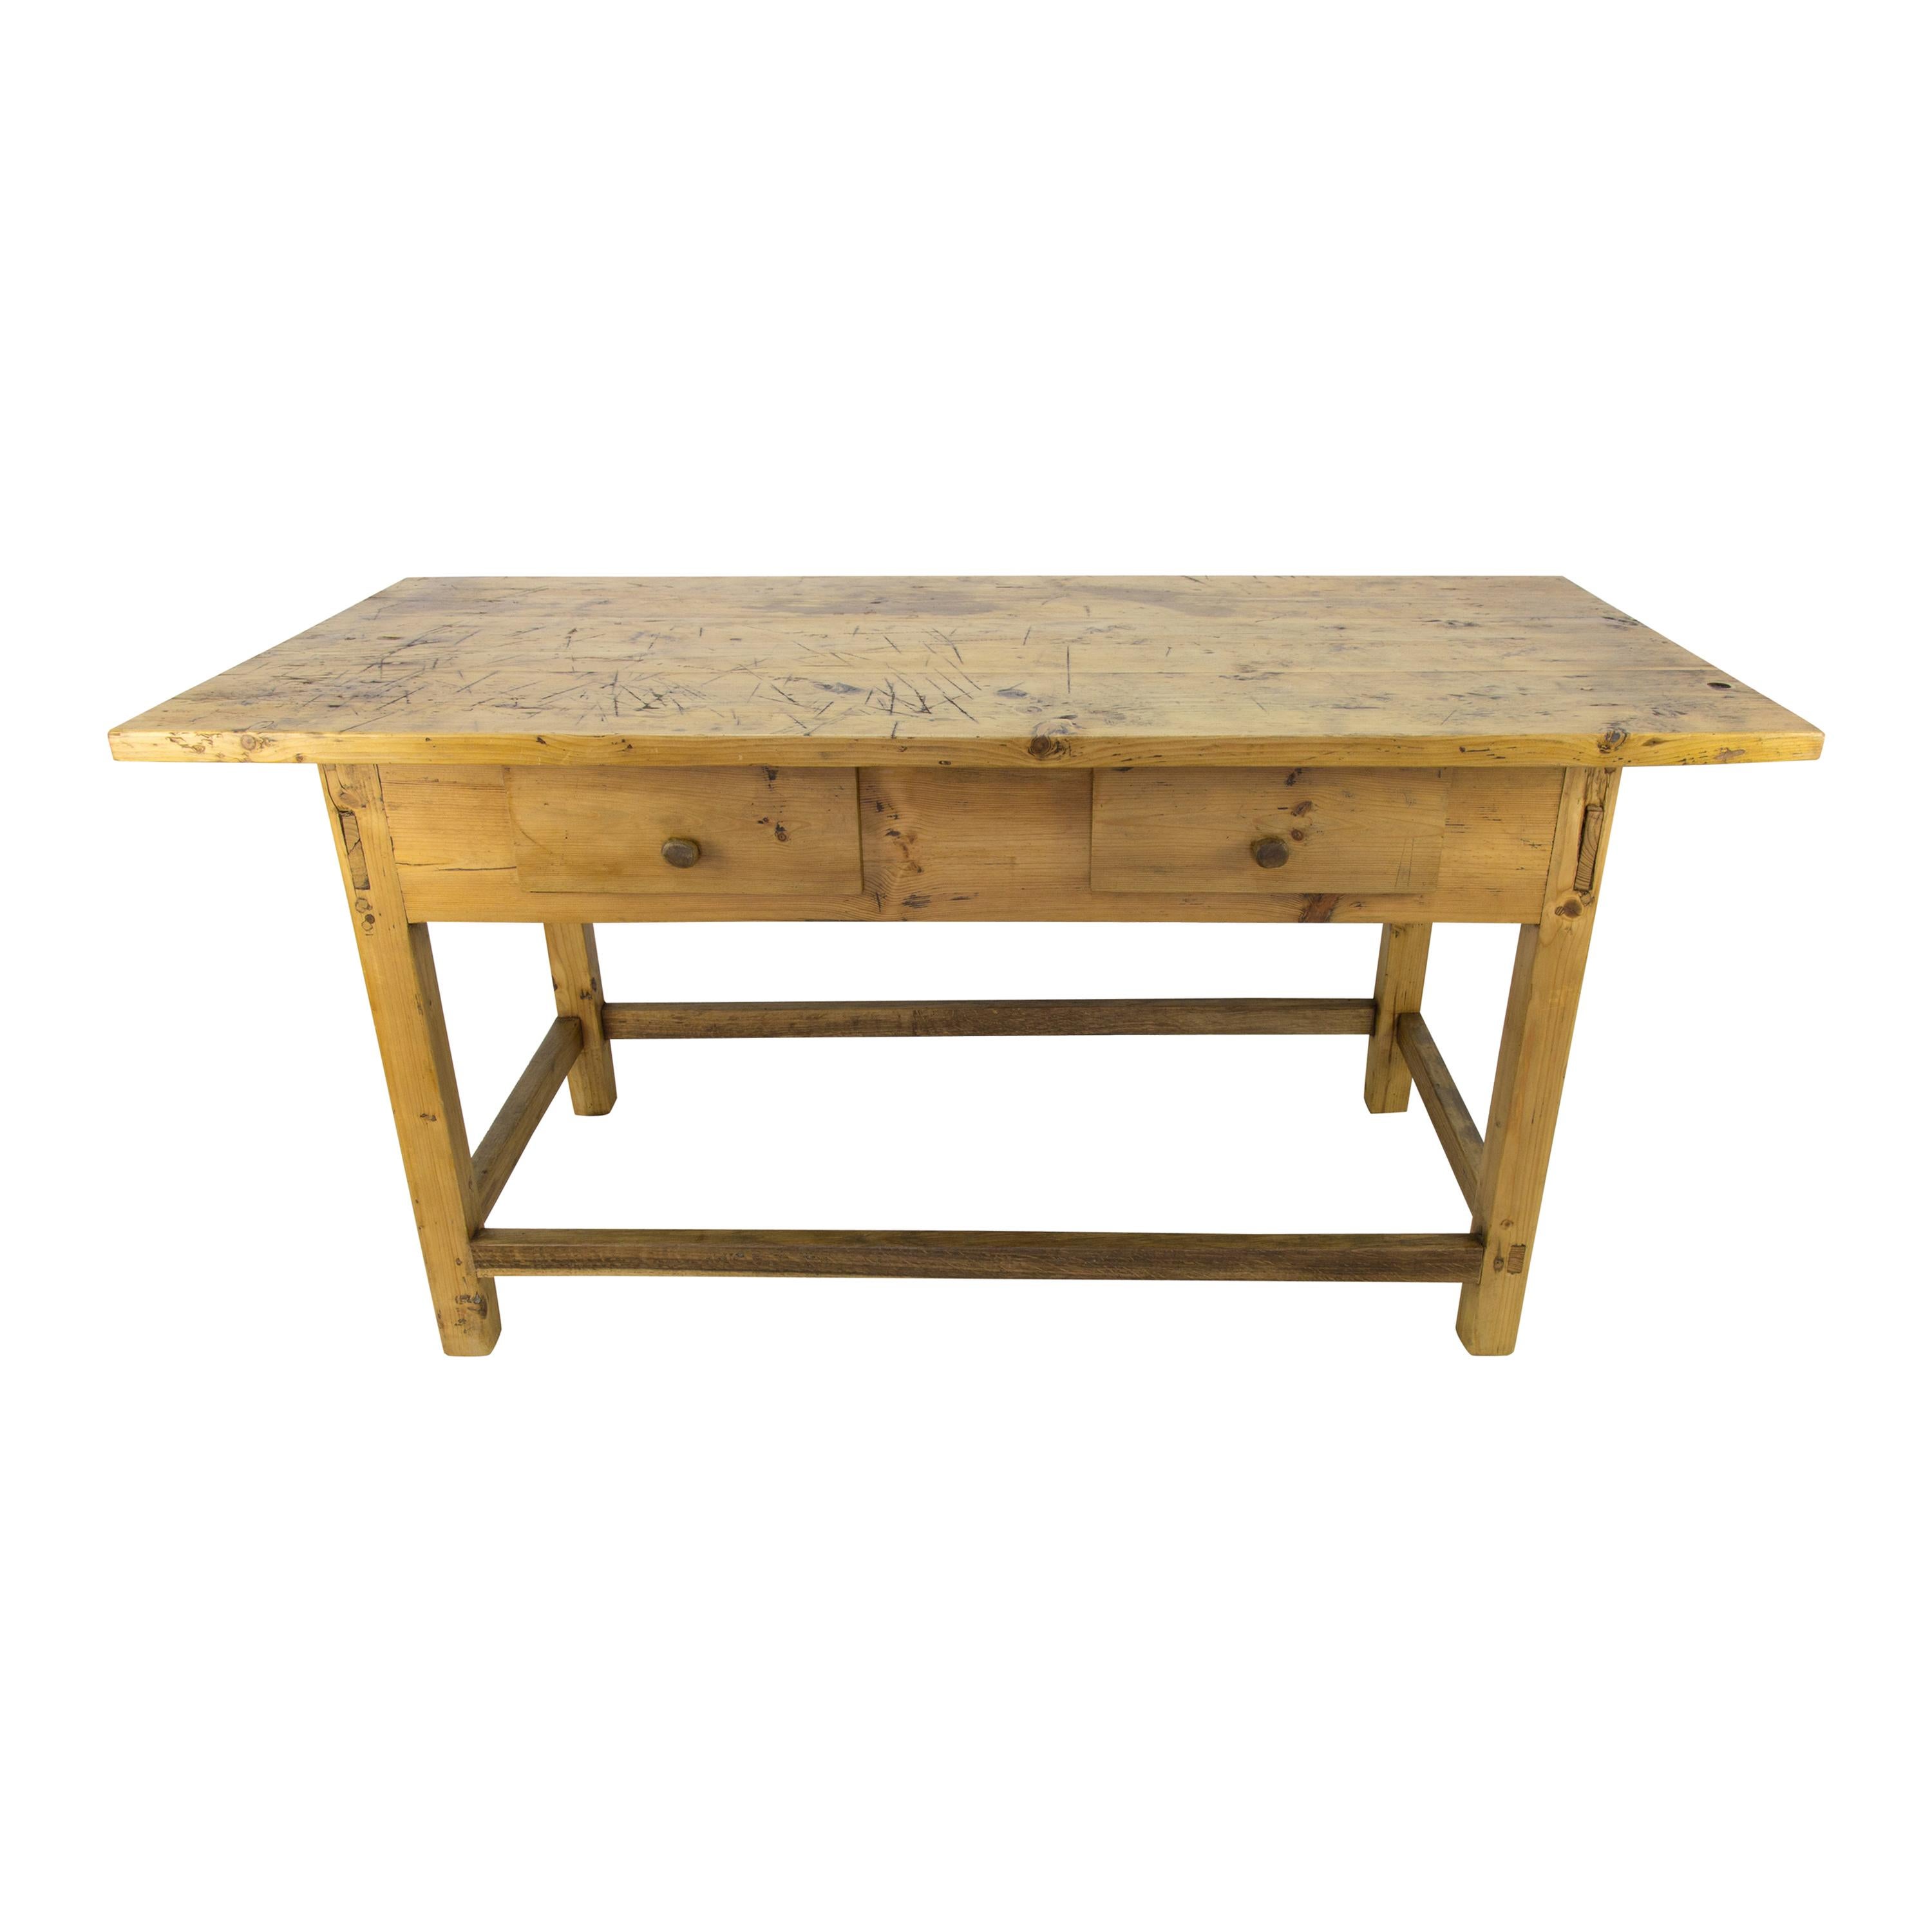 Rustic Country Style Baltic Pine Table, circa 1930s For Sale